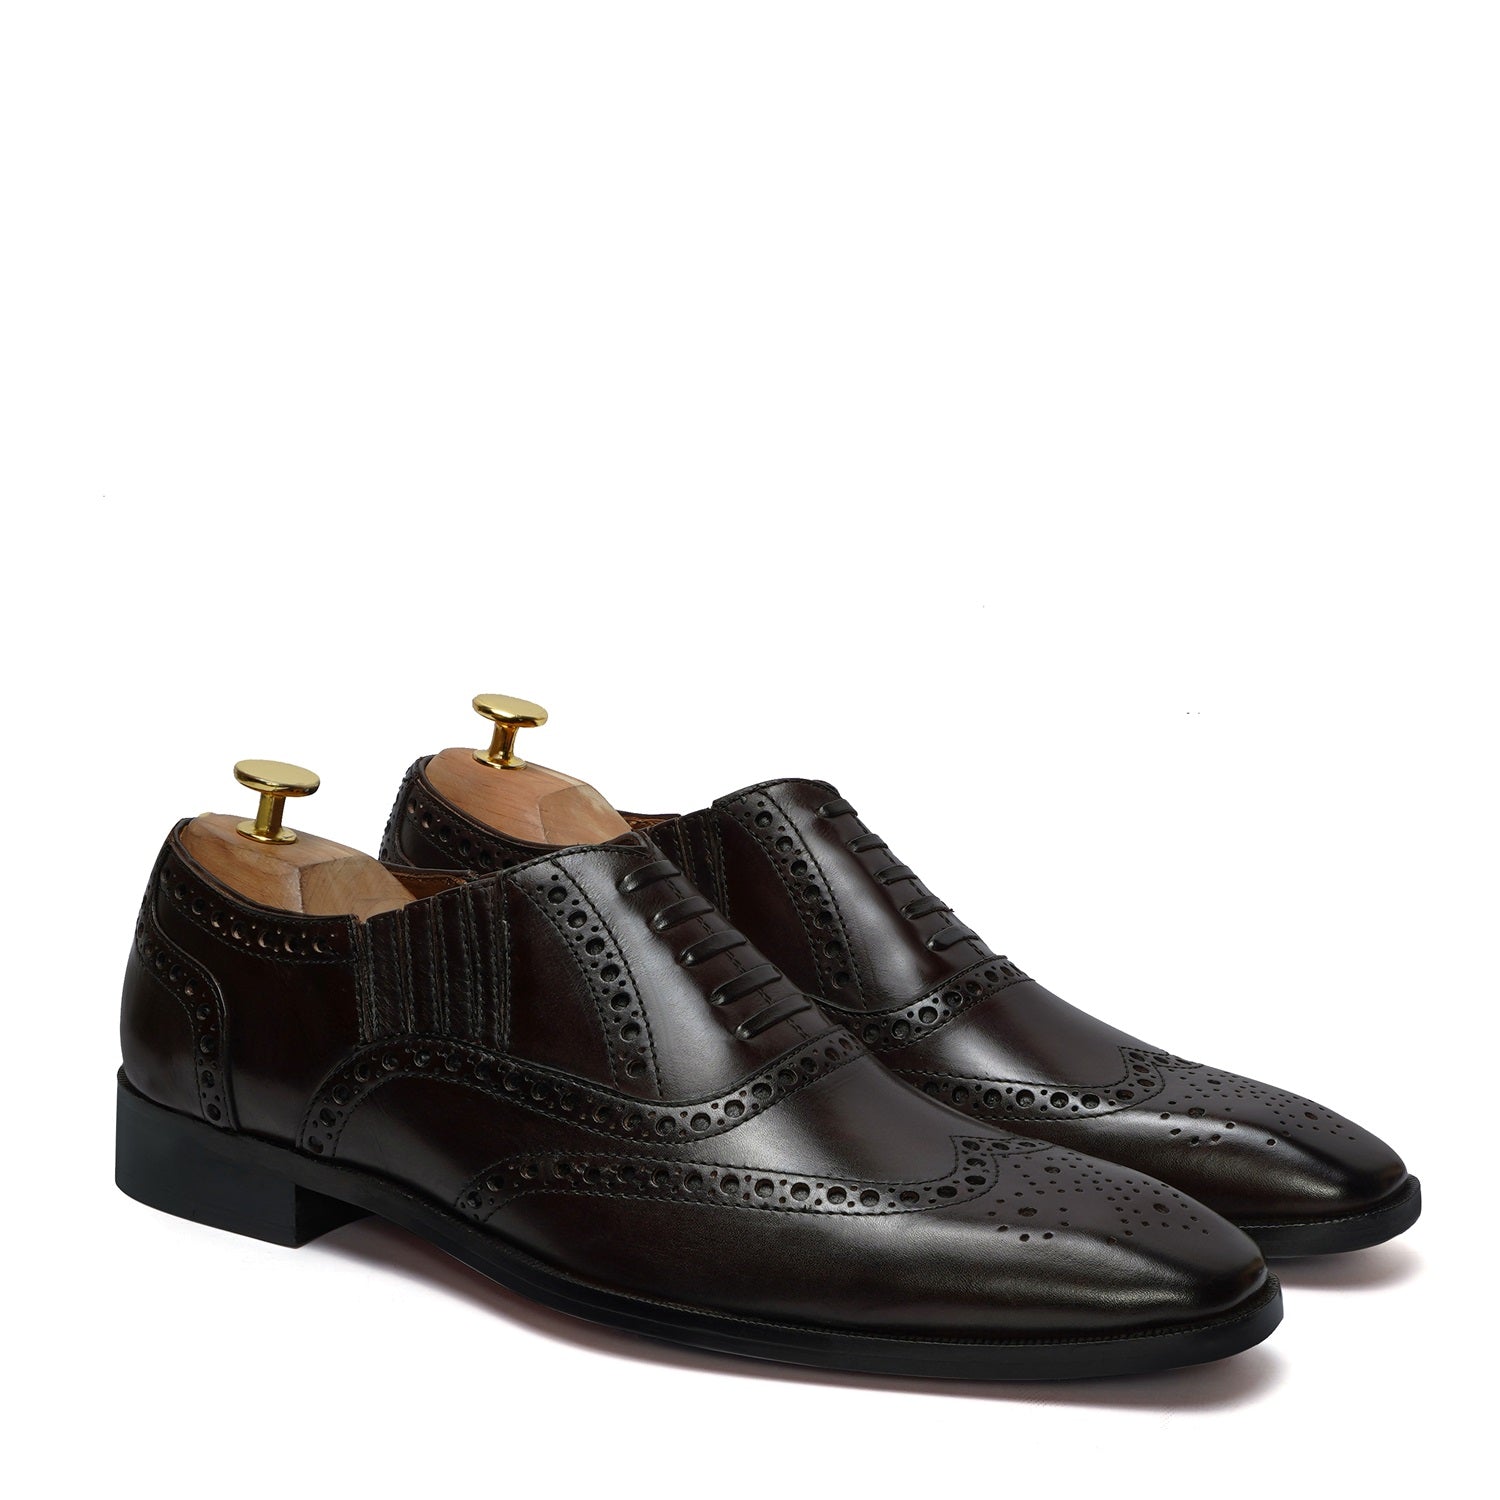 Fixed Lace-Up Lazy Man Formal Shoes in Dark Brown Leather with Stylish Wingtip Punching Brogue Design